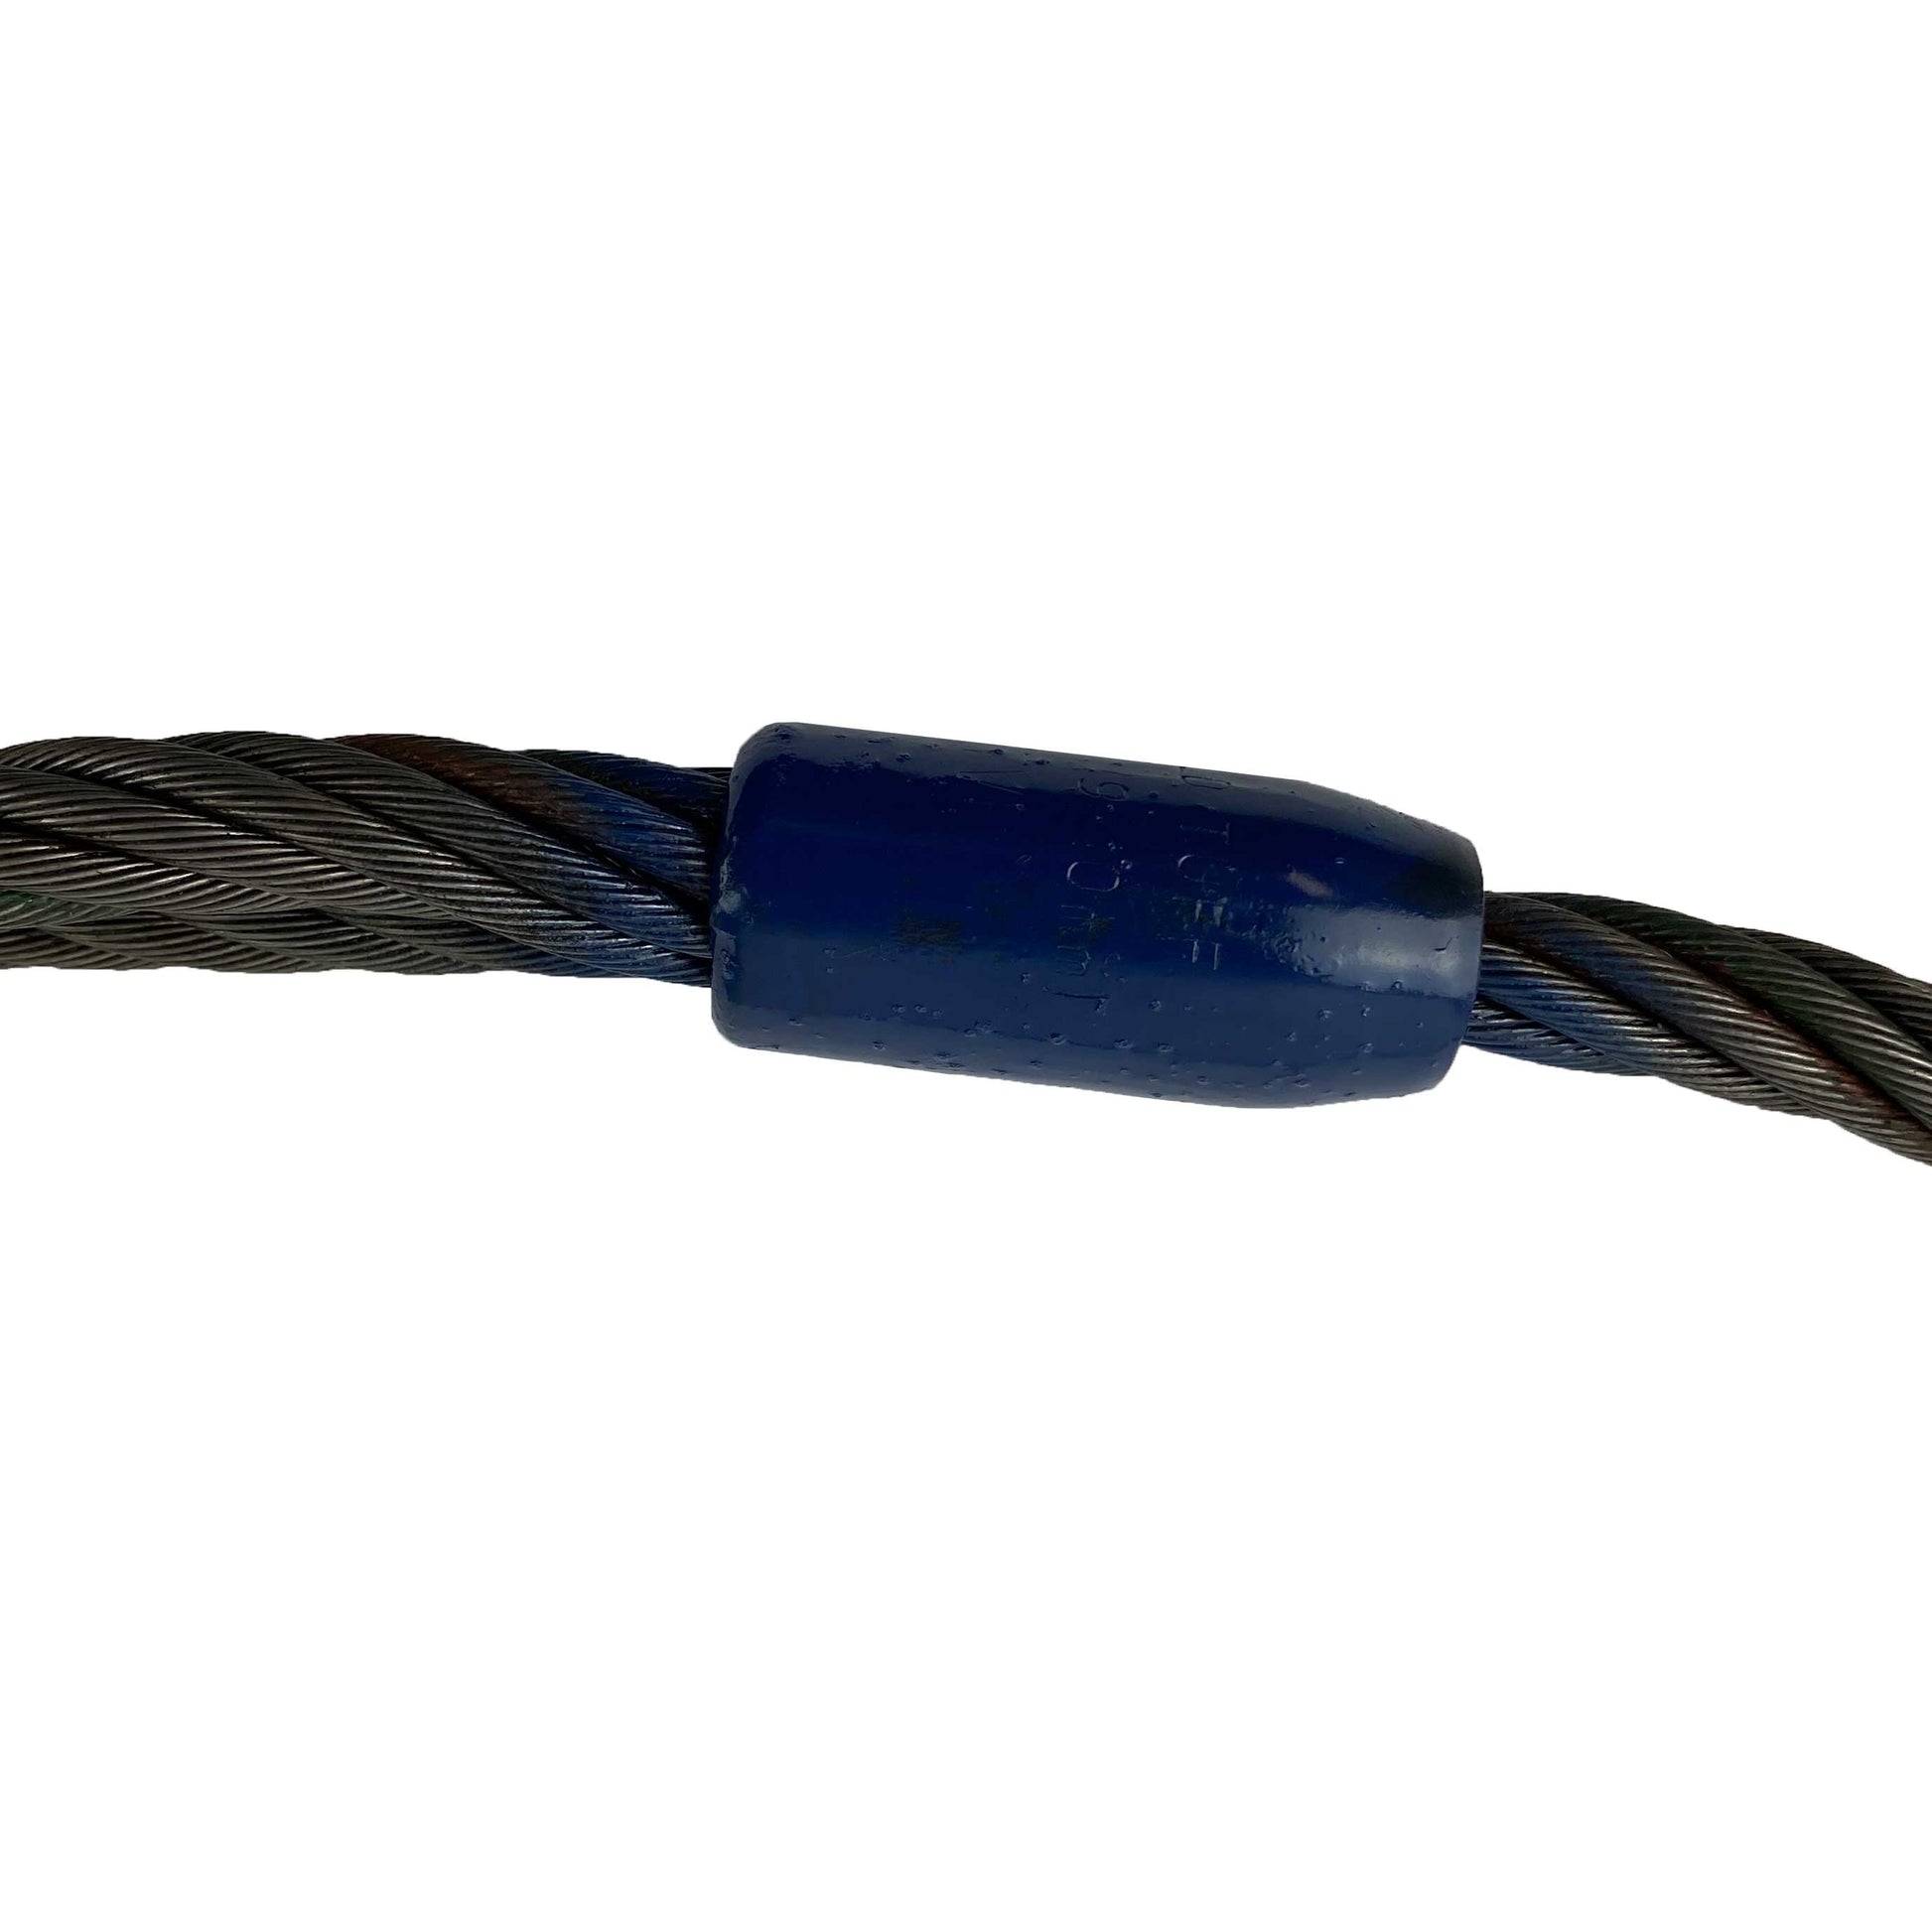 58 inch x 3 foot Mechanical Splice Grommet Wire Rope Sling image 4 of 4